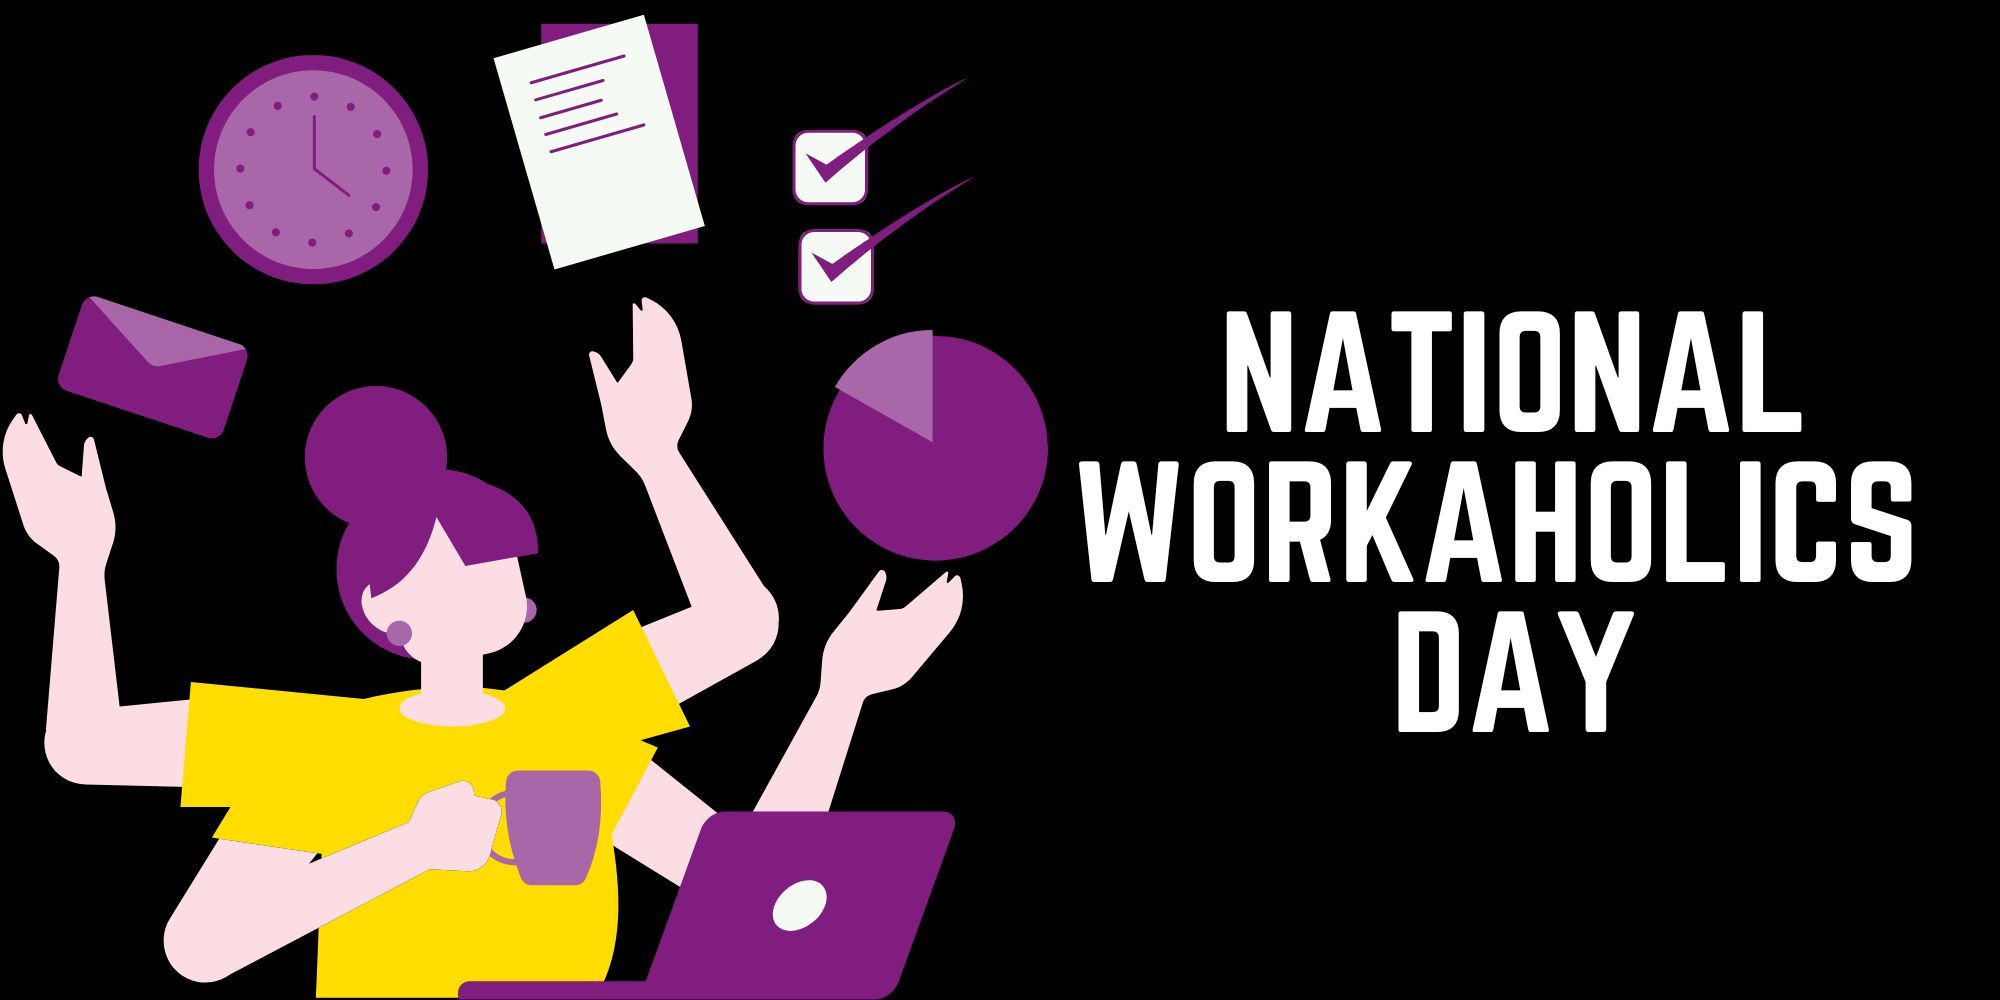 Work-Life Balance: The Essence of National Workaholics Day